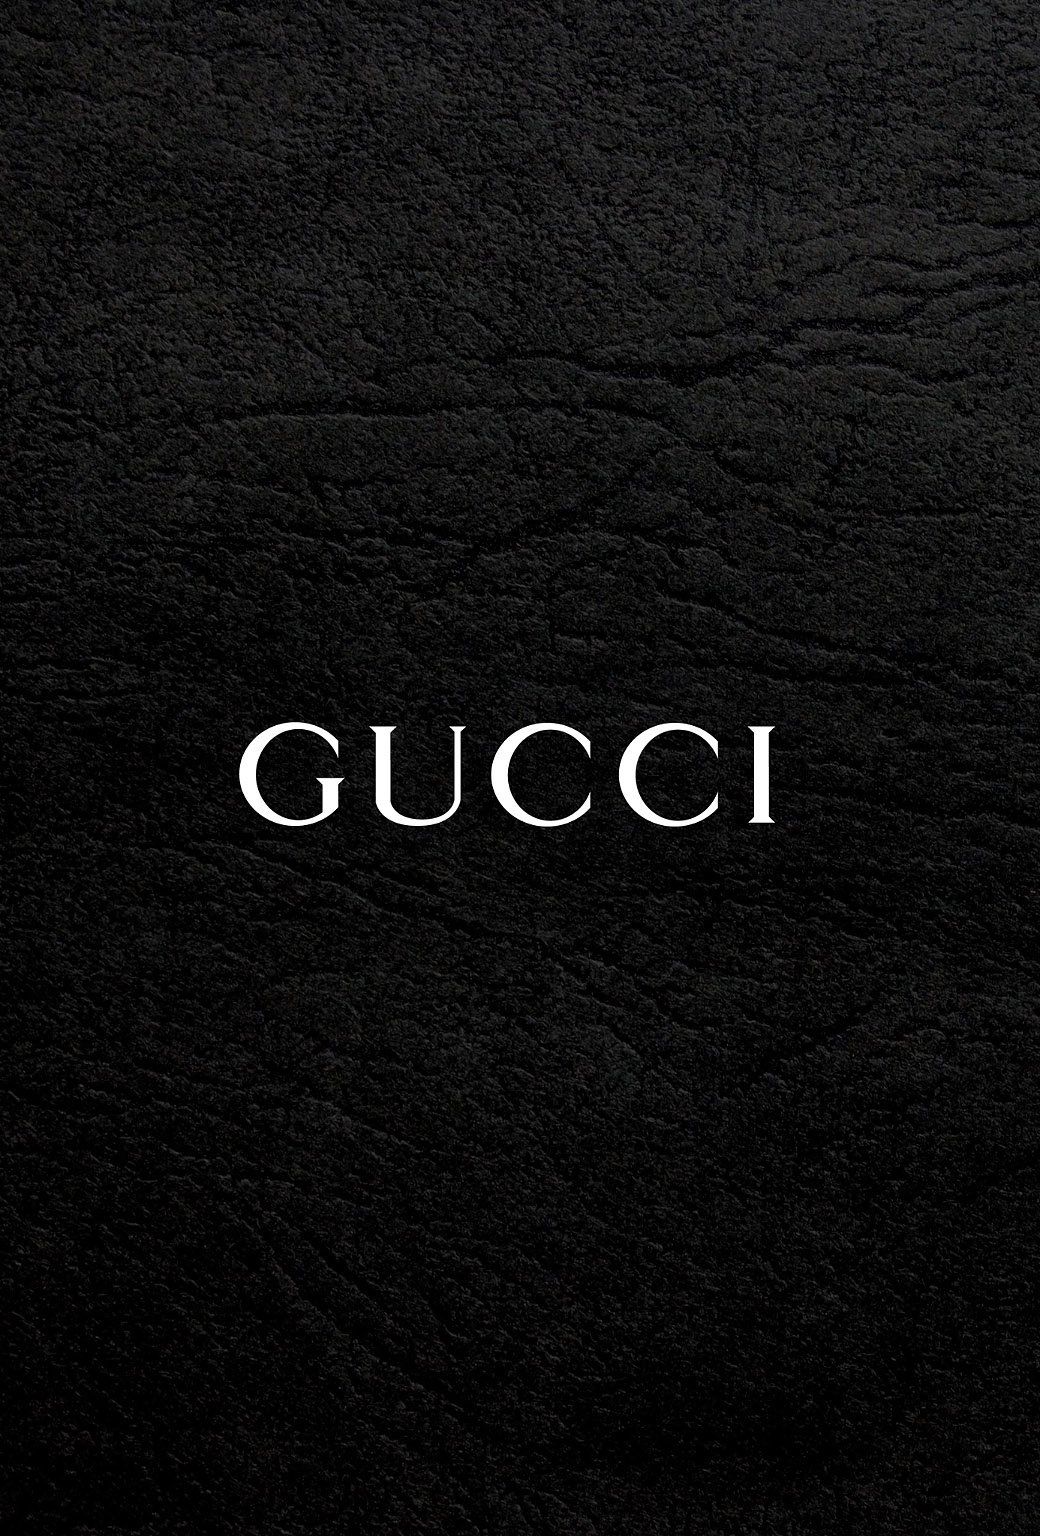 Gucci iPhone 6 Wallpapers on WallpaperDog